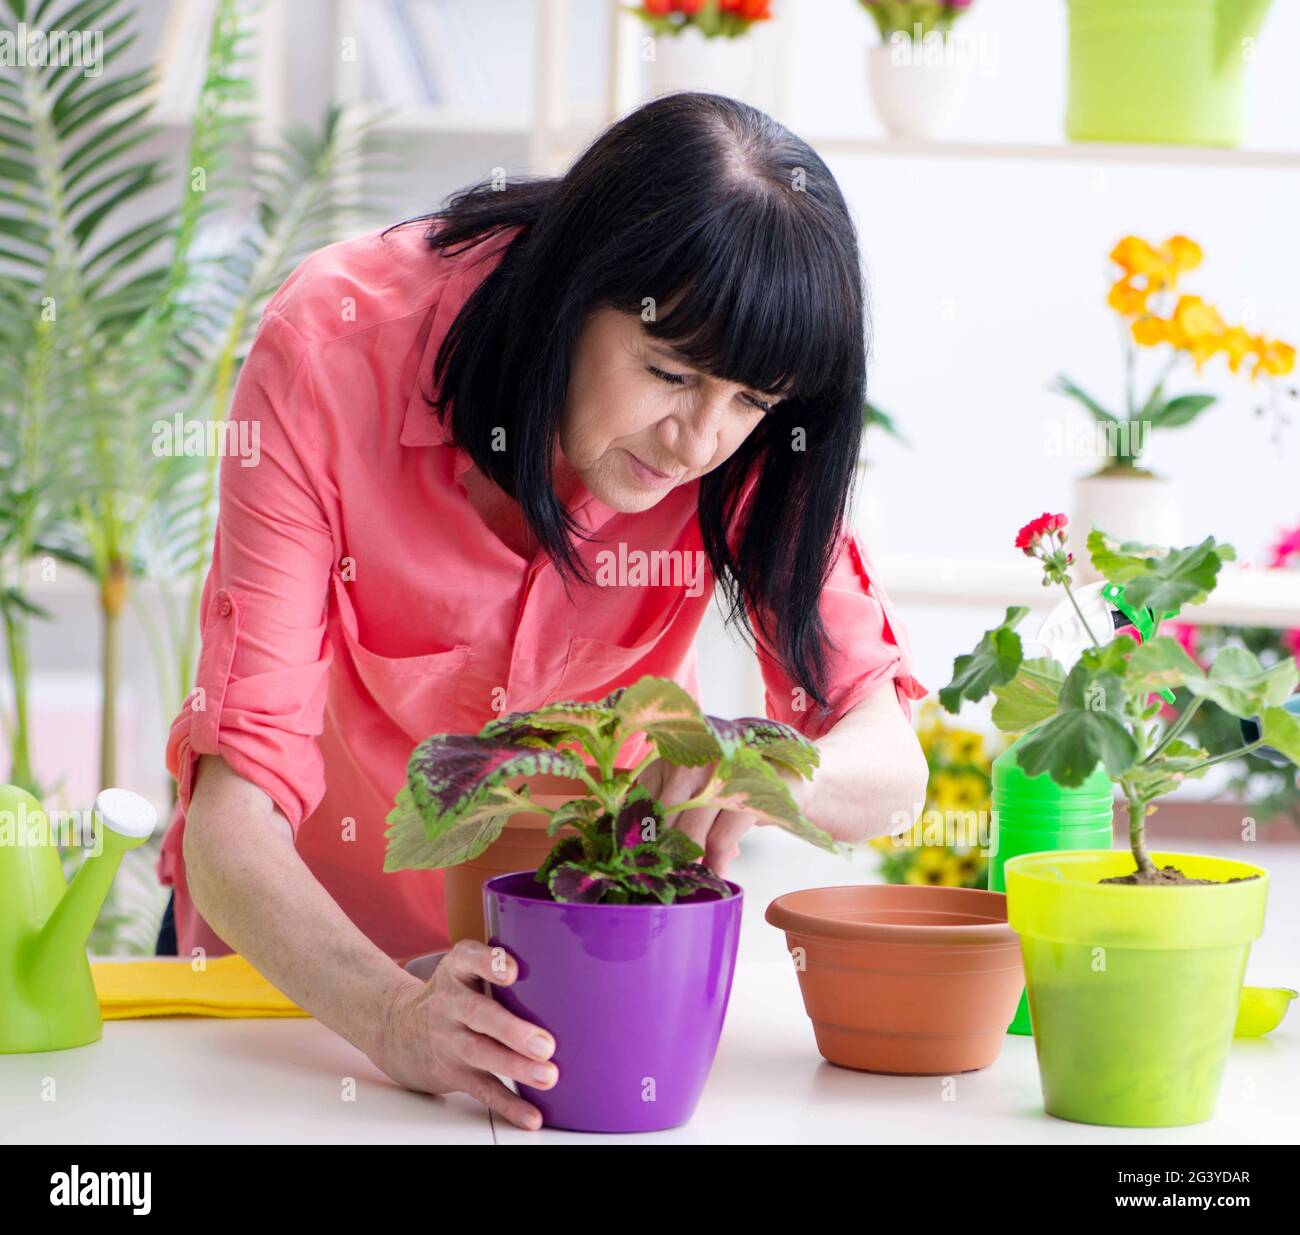 The woman florist working in the flower shop Stock Photo